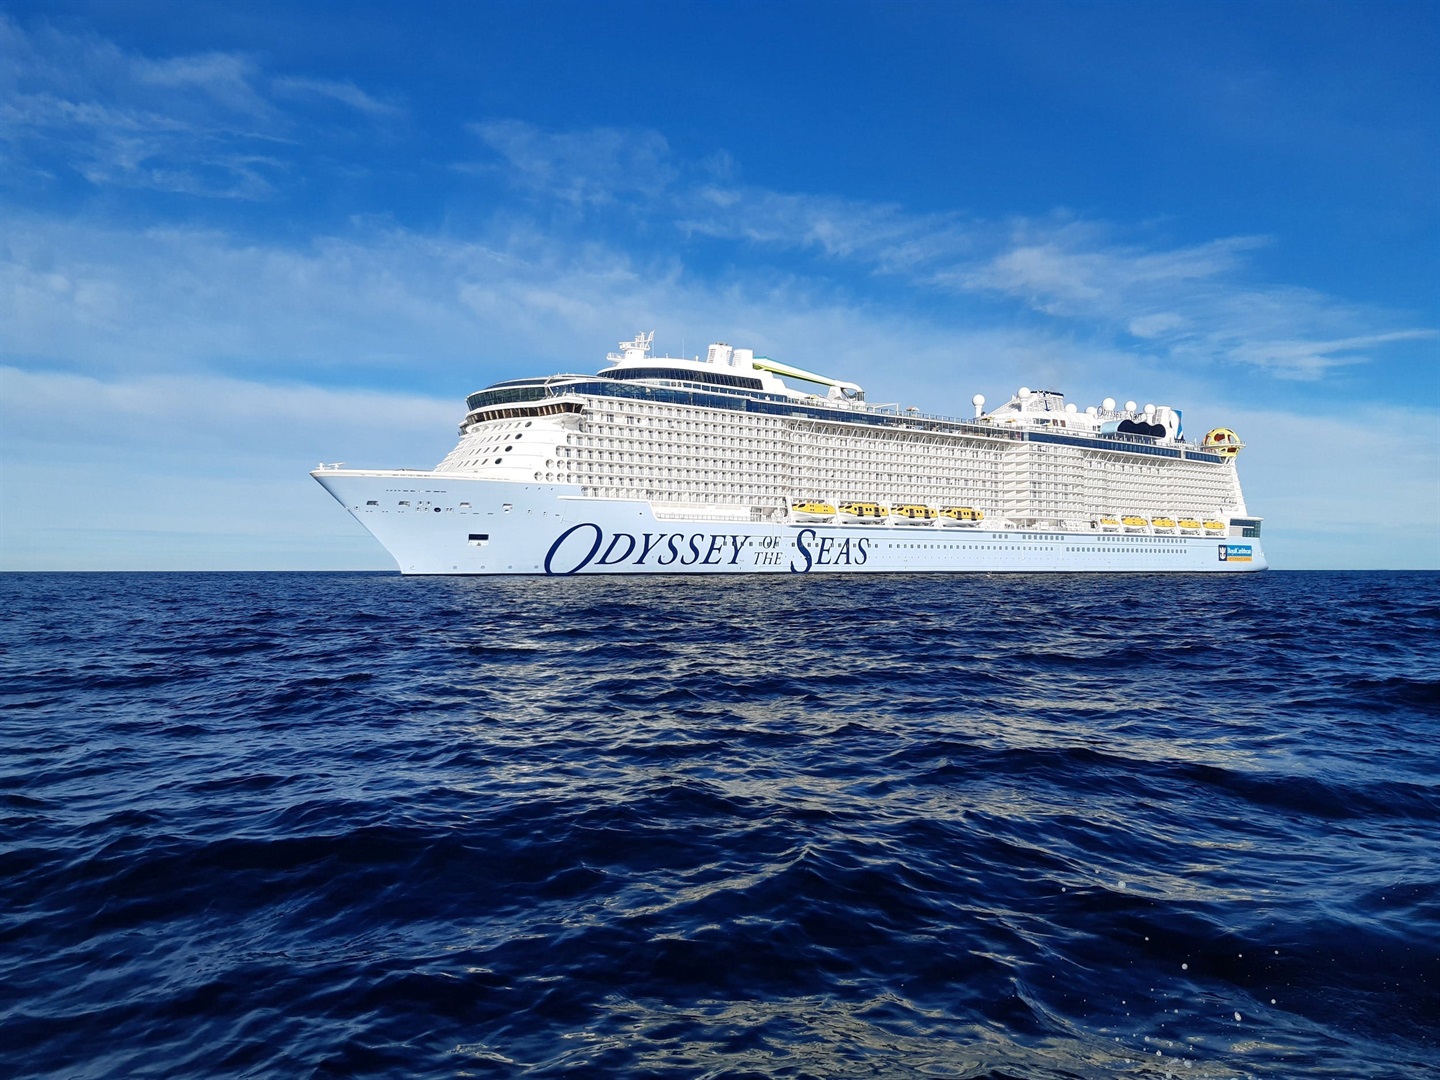 TAKE A LOOK | Royal Caribbean just welcomed its newest ship, the